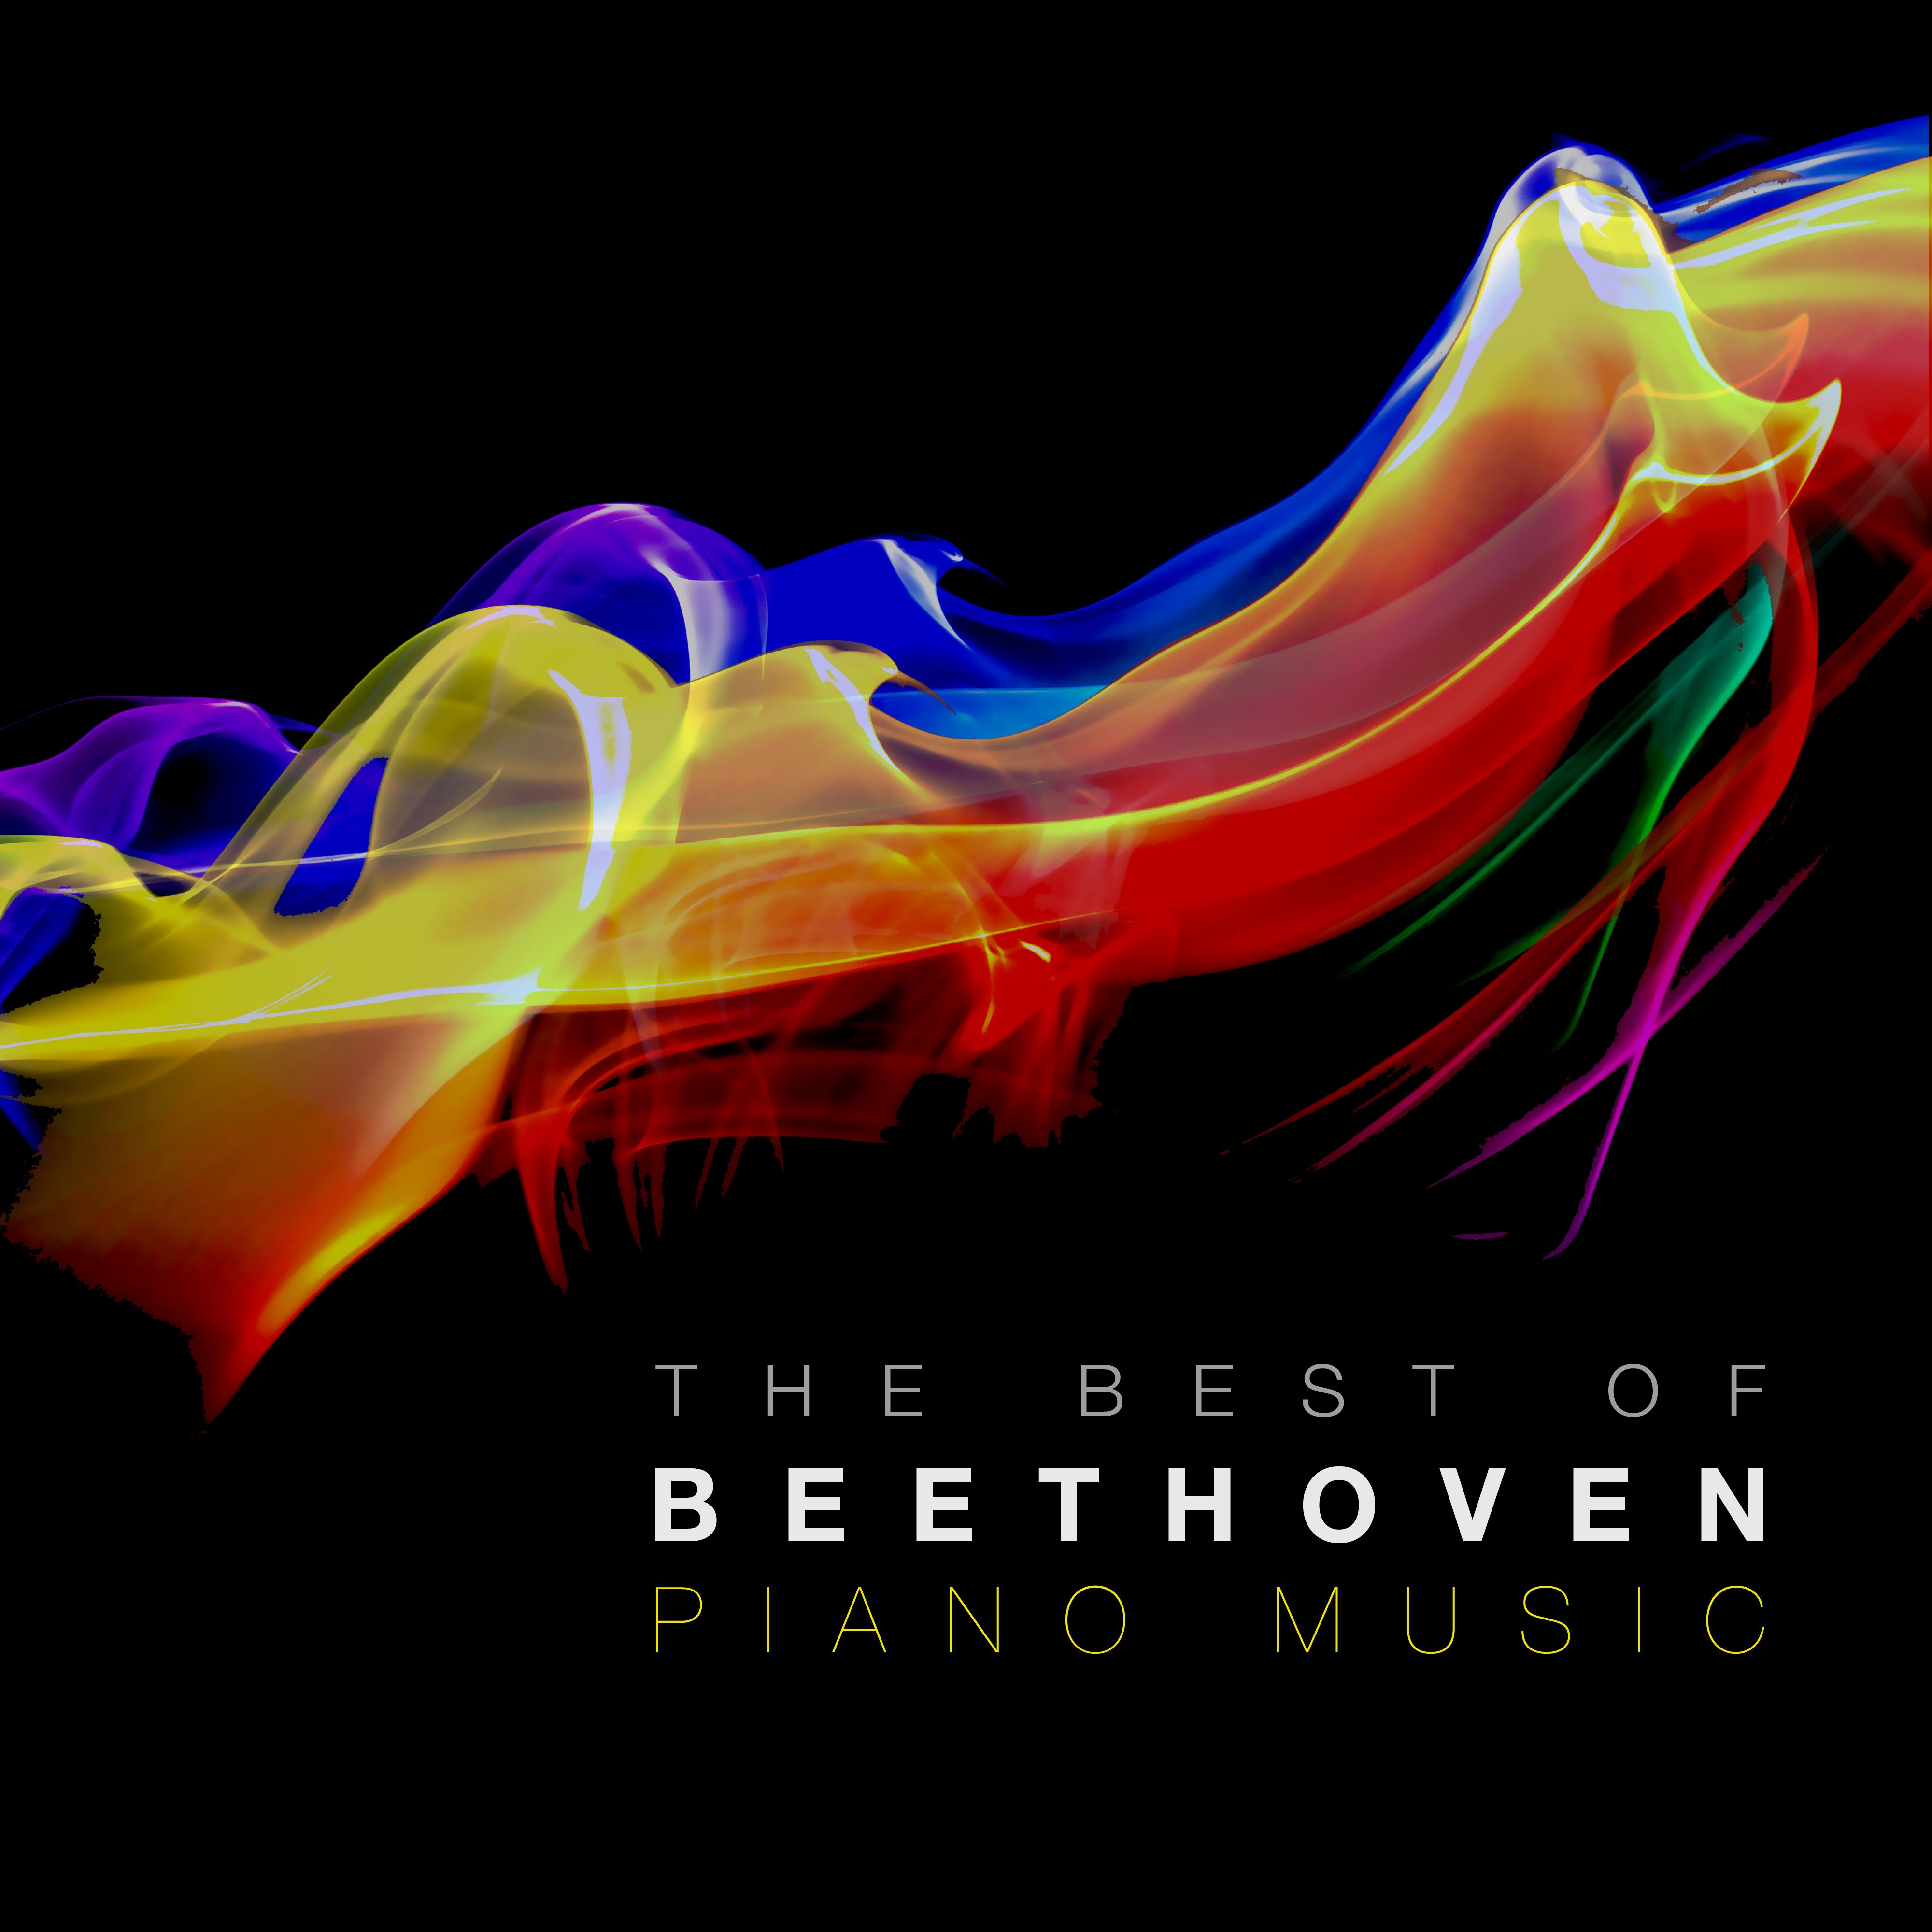 The Best of Beethoven Piano Music: The Greatest Ever Pieces by Ludwig van Beethoven